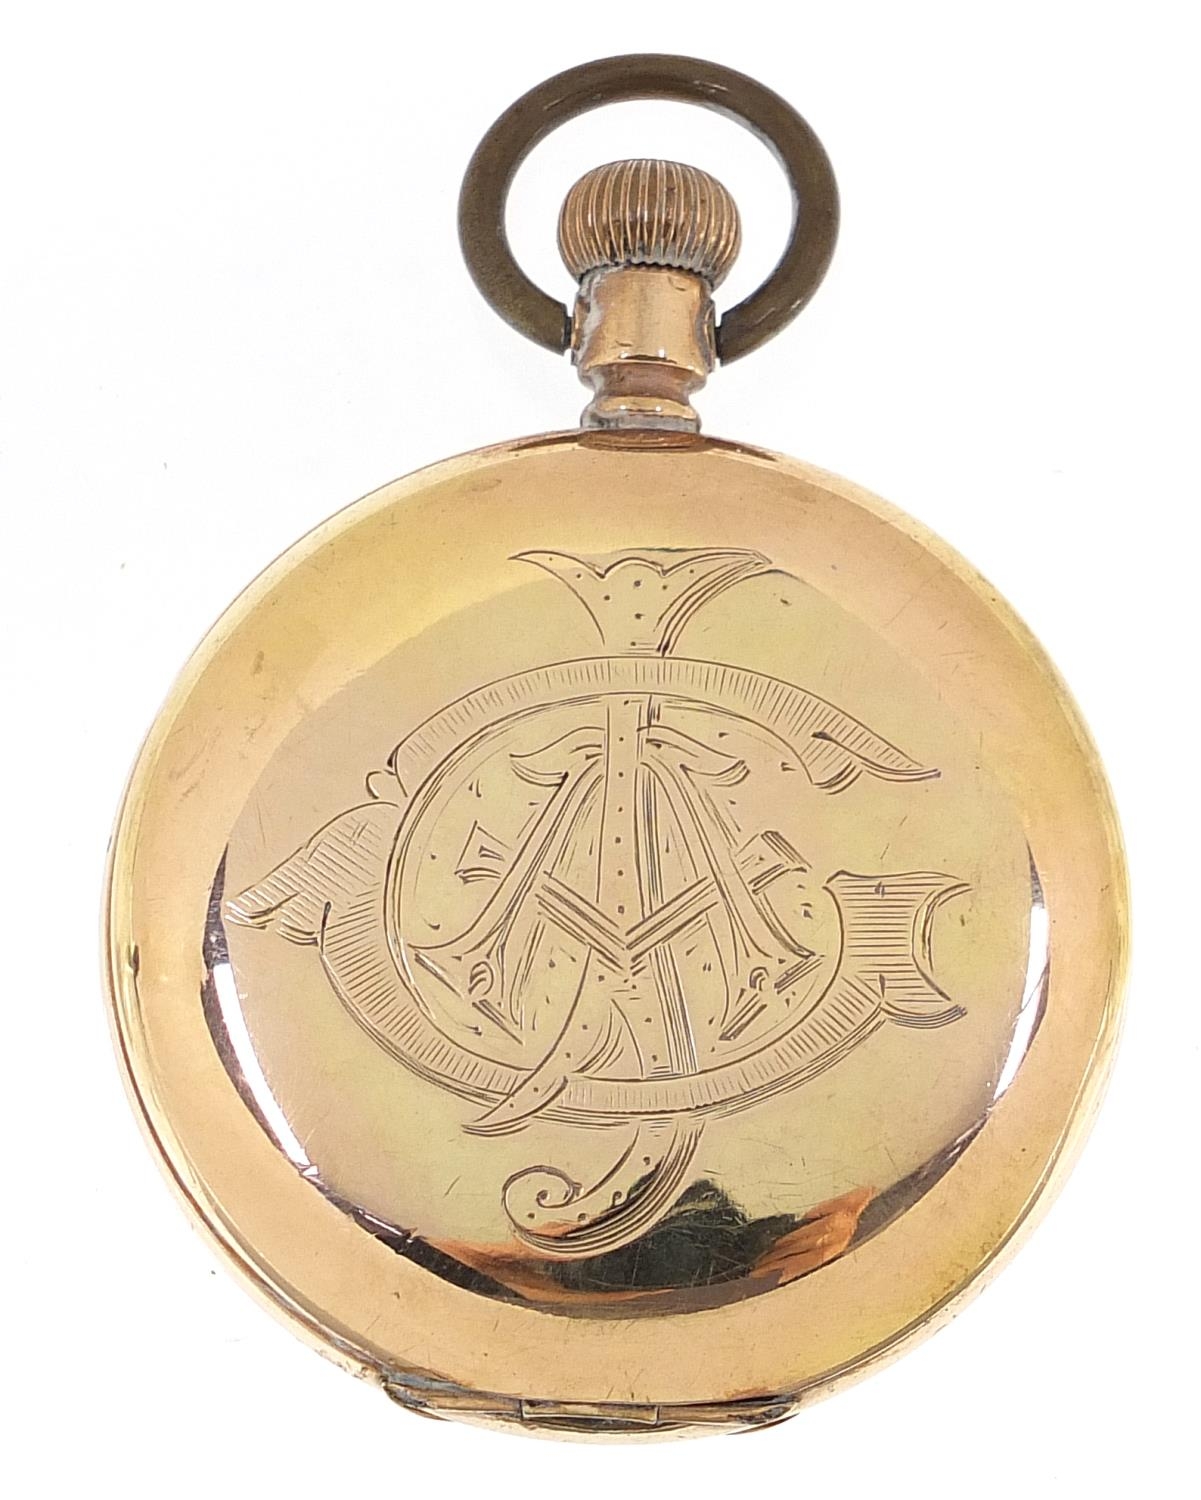 Elgin gold plated full hunter pocket watch, the movement numbered 15028339, 50mm in diameter - Image 2 of 5